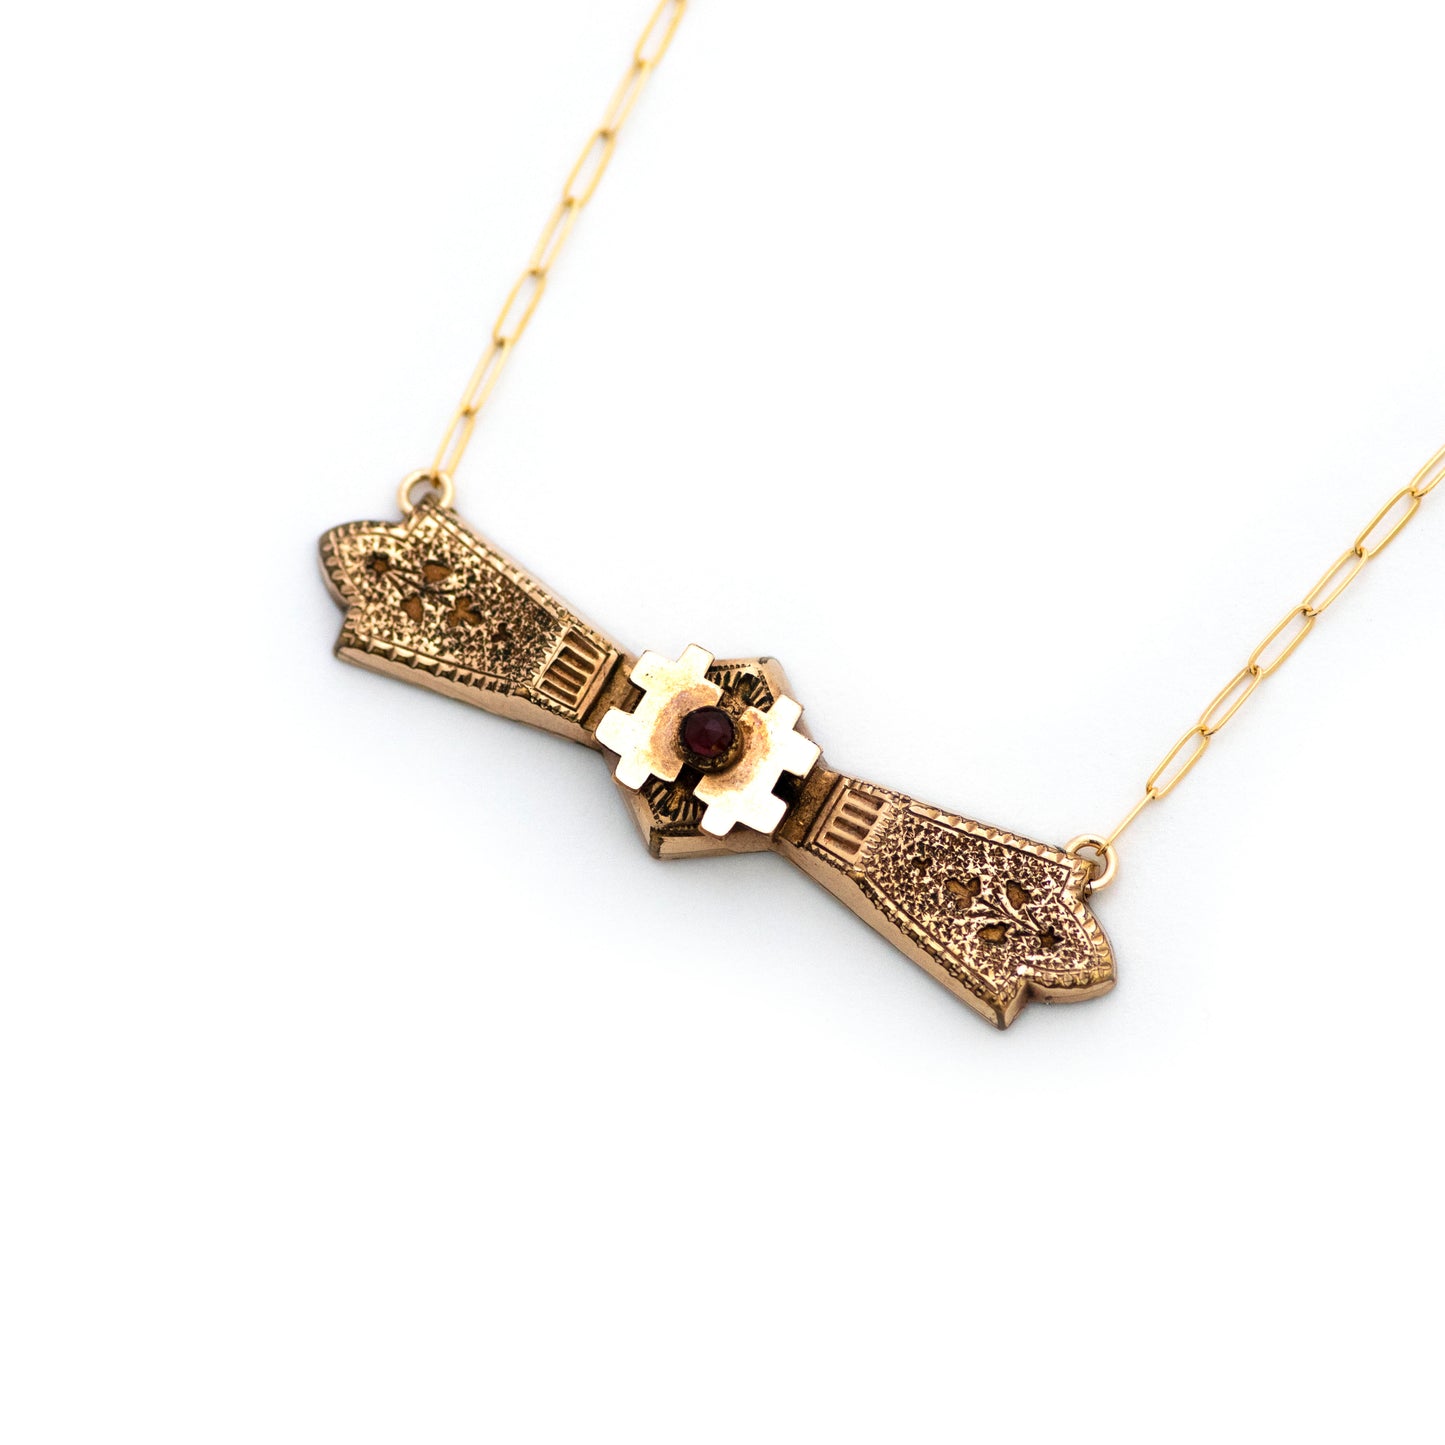 This one-of-a-kind conversion necklace is made up of:  Gold filled Victorian bar pin pendant from the late 1800s with hand engraved floral details and a Bohemian pyrope garnet at the center.